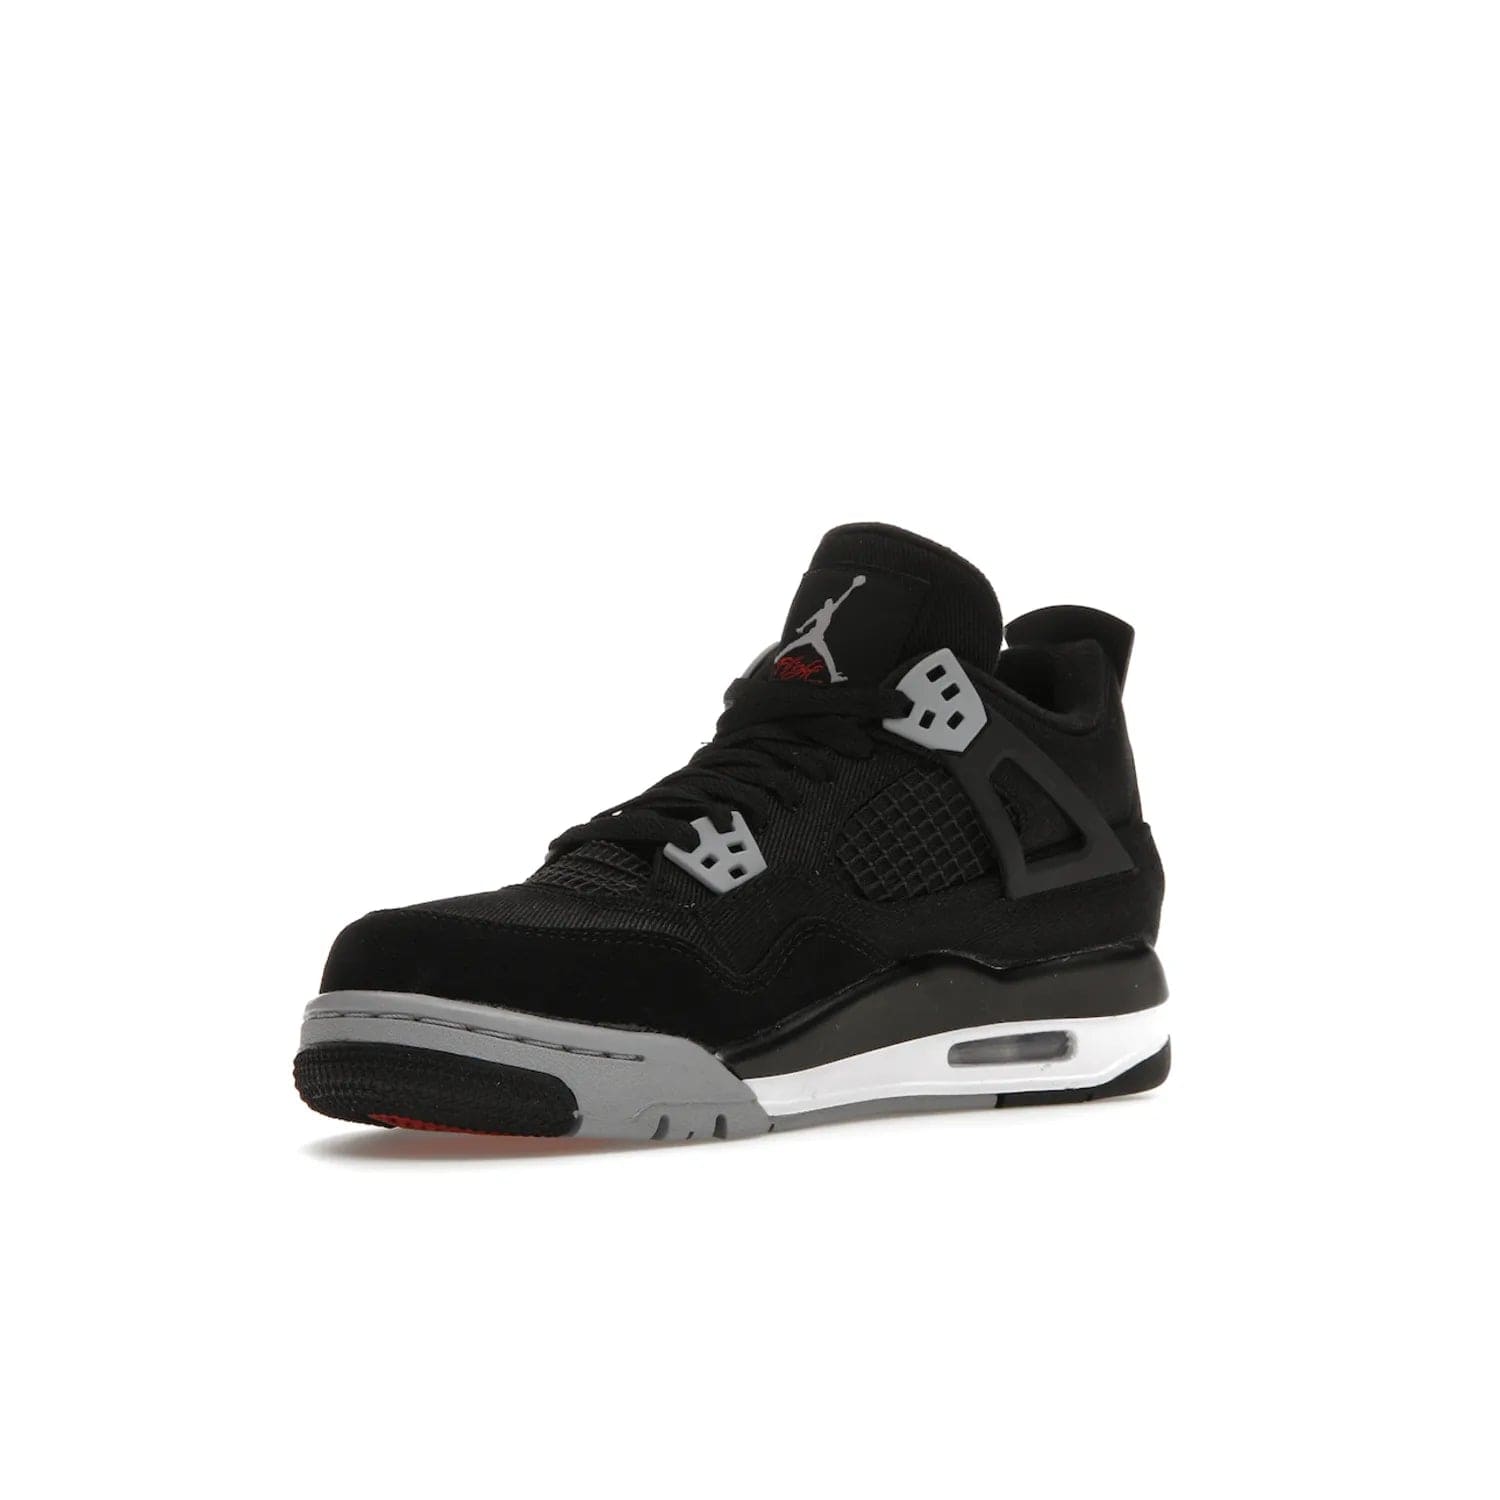 Jordan 4 Retro Black Canvas (GS) - Image 15 - Only at www.BallersClubKickz.com - Premium Air Jordan 4 Retro Black Canvas in grade-schooler's catalog. Featuring black suede canvas upper, grey molding, accents in red, white midsole, woven Jumpman tag, & visible AIR cushioning. Releasing Oct. 1, 2022.